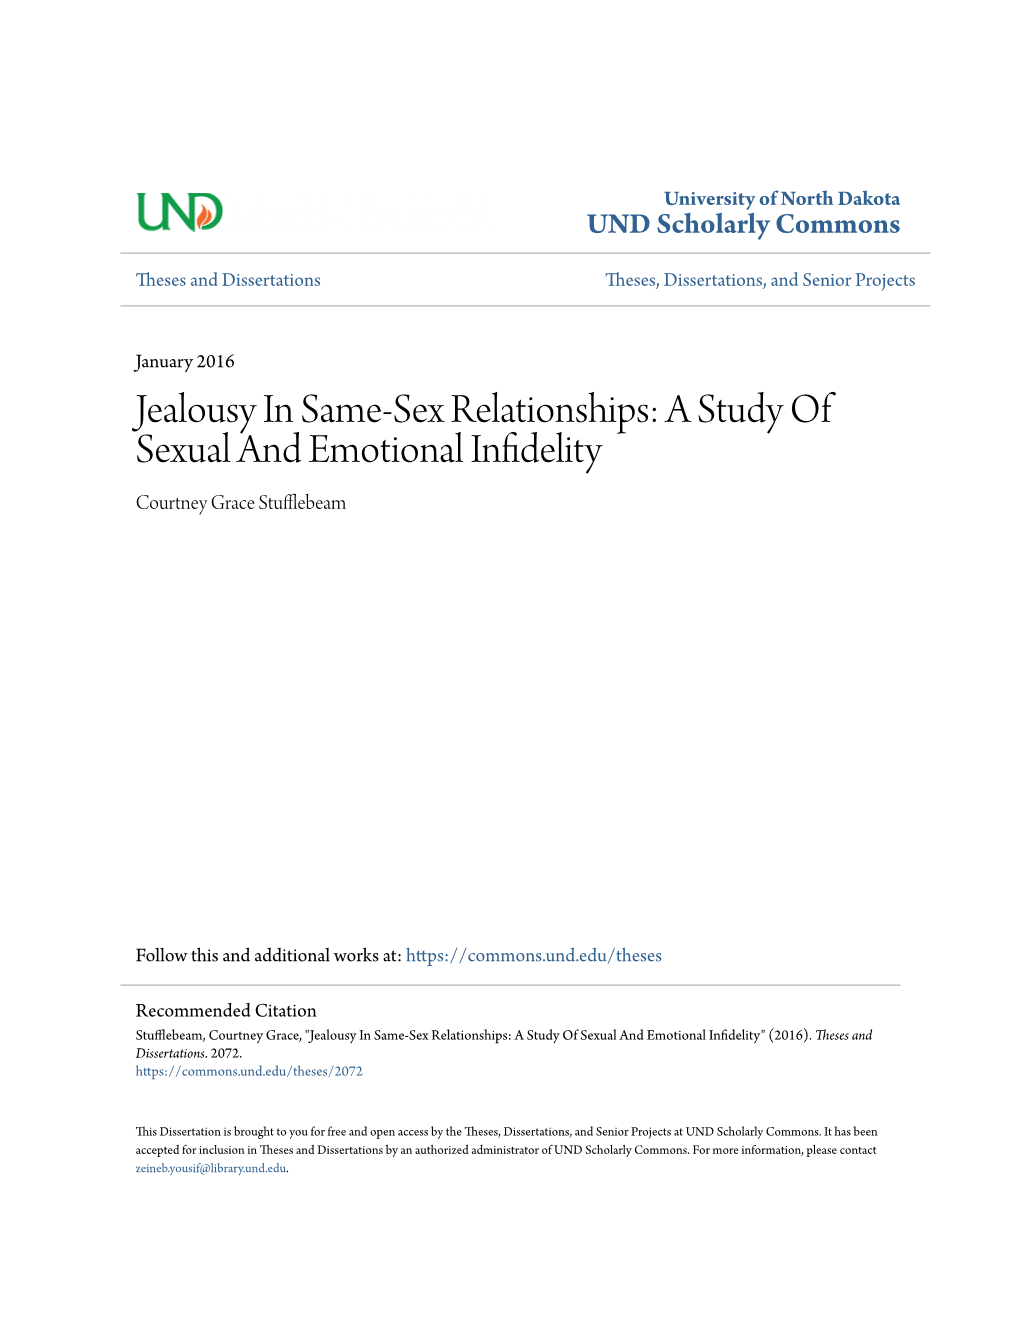 Jealousy in Same-Sex Relationships: a Study of Sexual and Emotional Infidelity Courtney Grace Stufflebeam